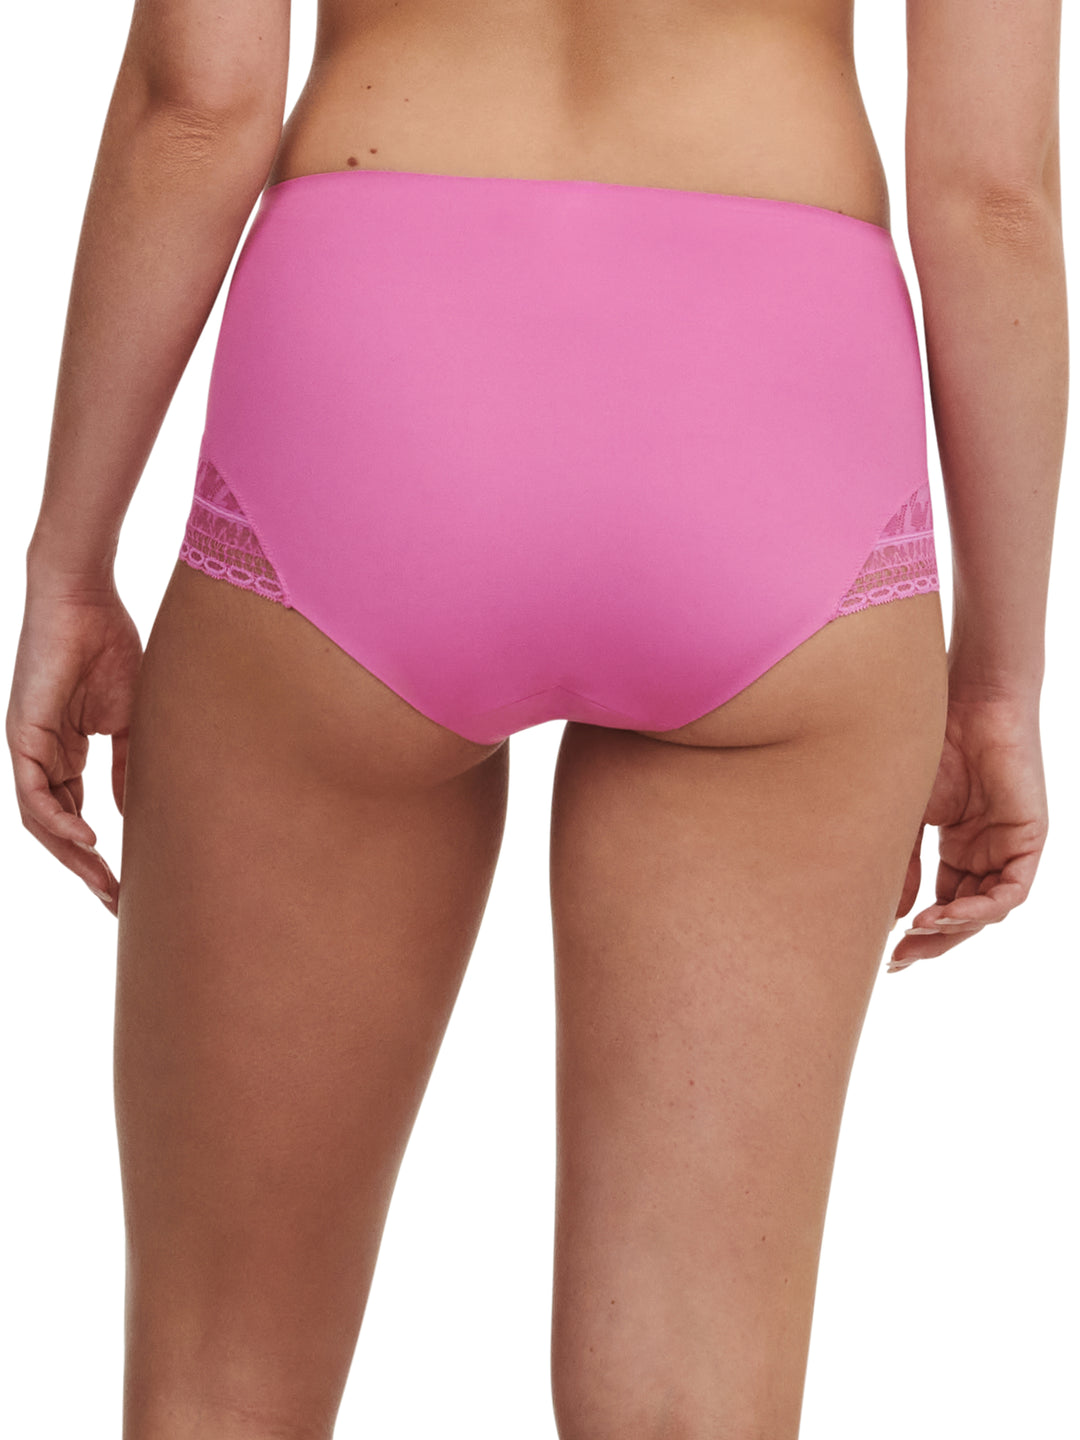 Chantelle - Impression High-Waisted Support Full Brief Rosebud